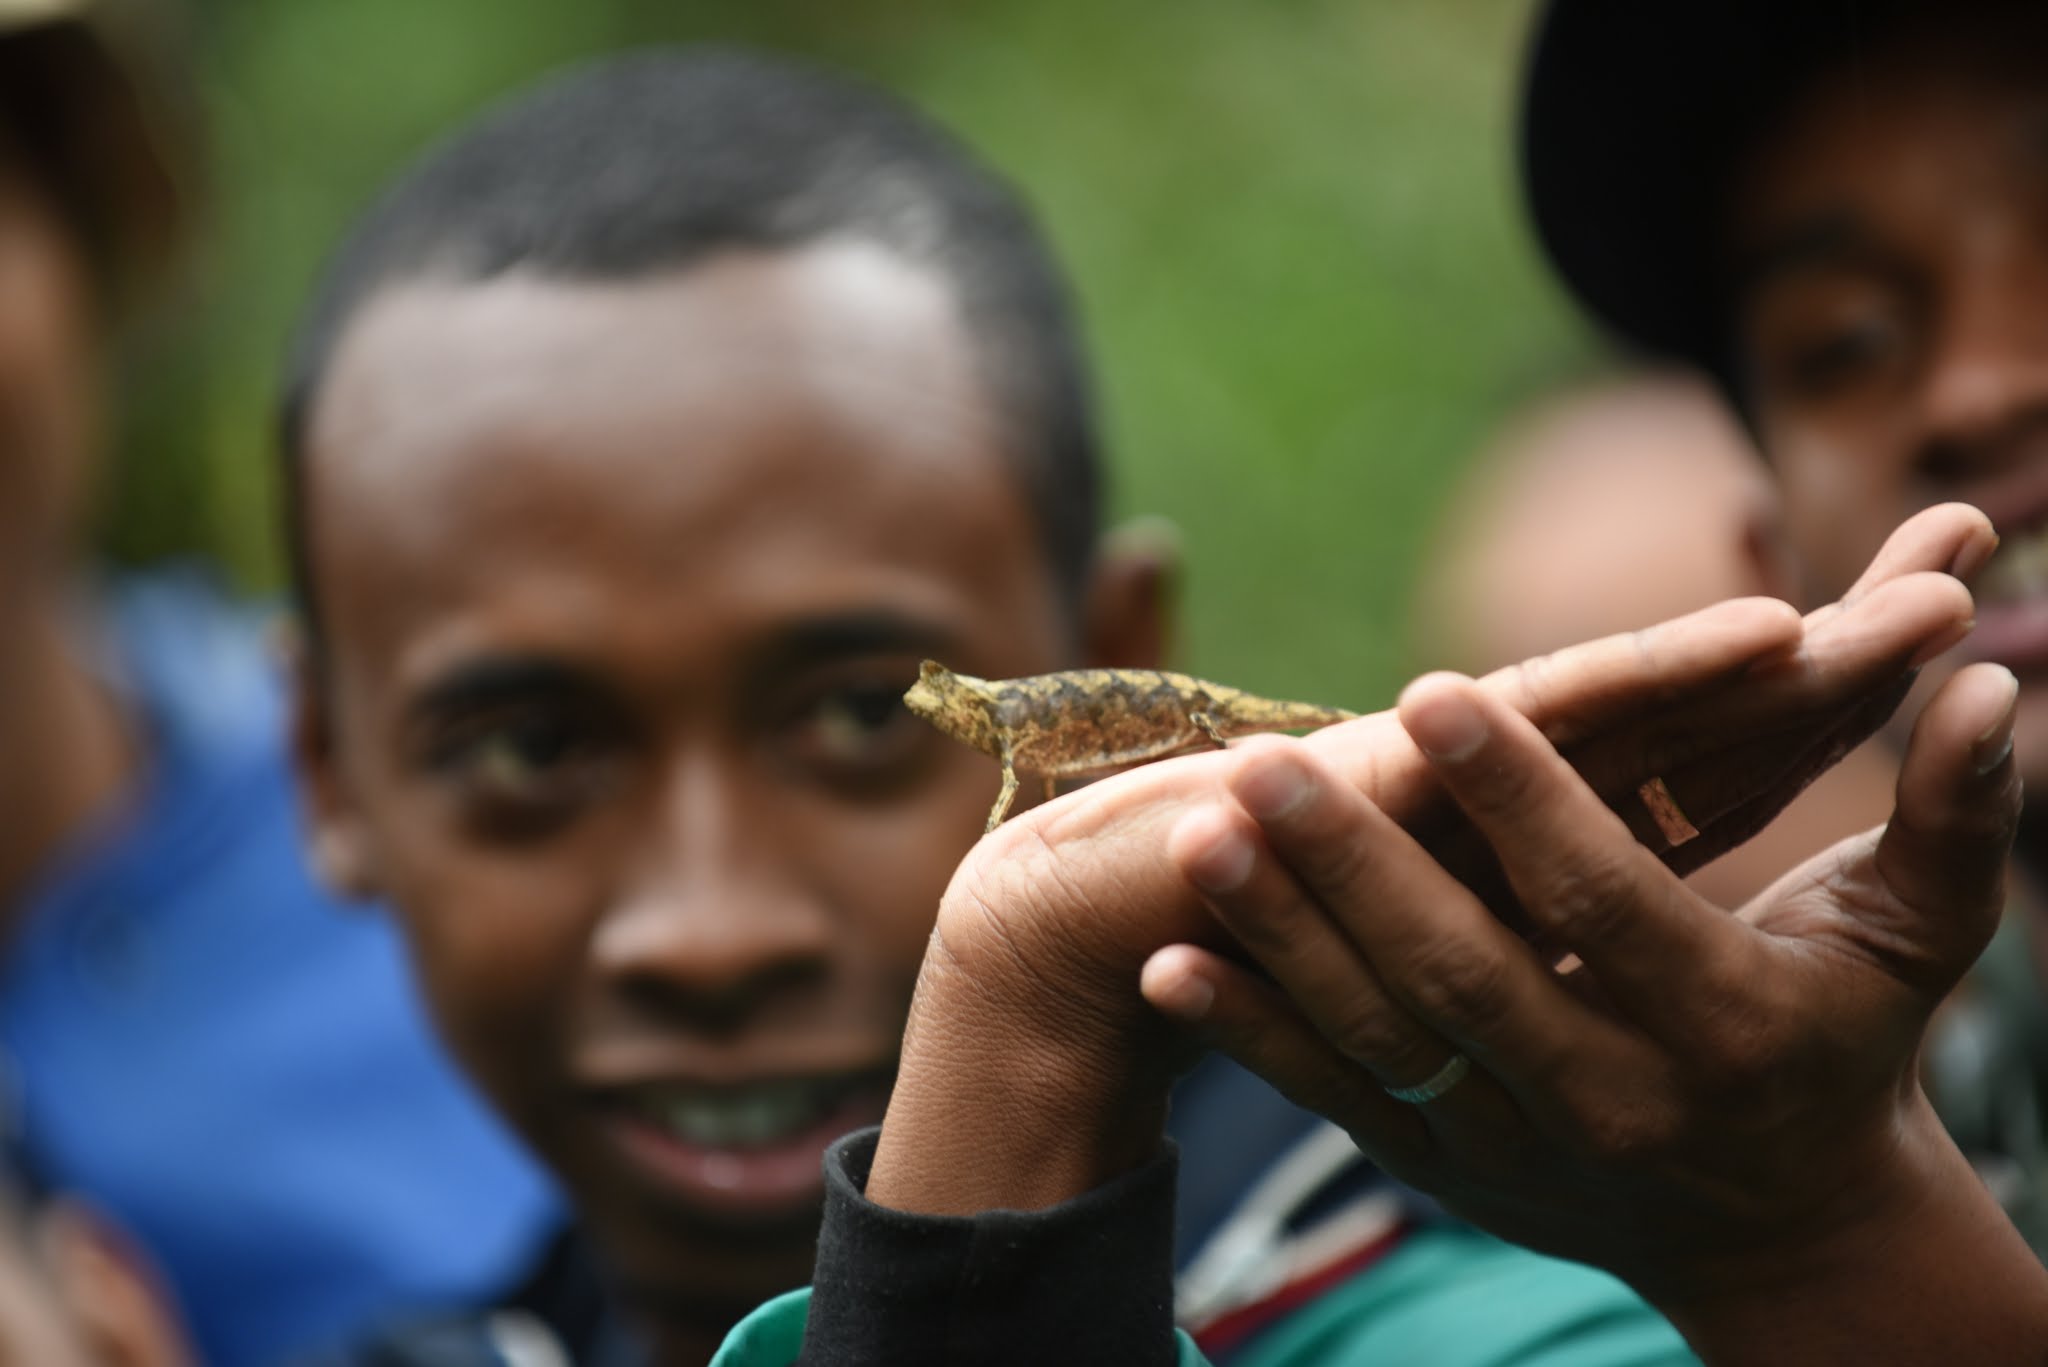 Cara writes for NatGeo about teaching ecological modeling in Madagascar -- 